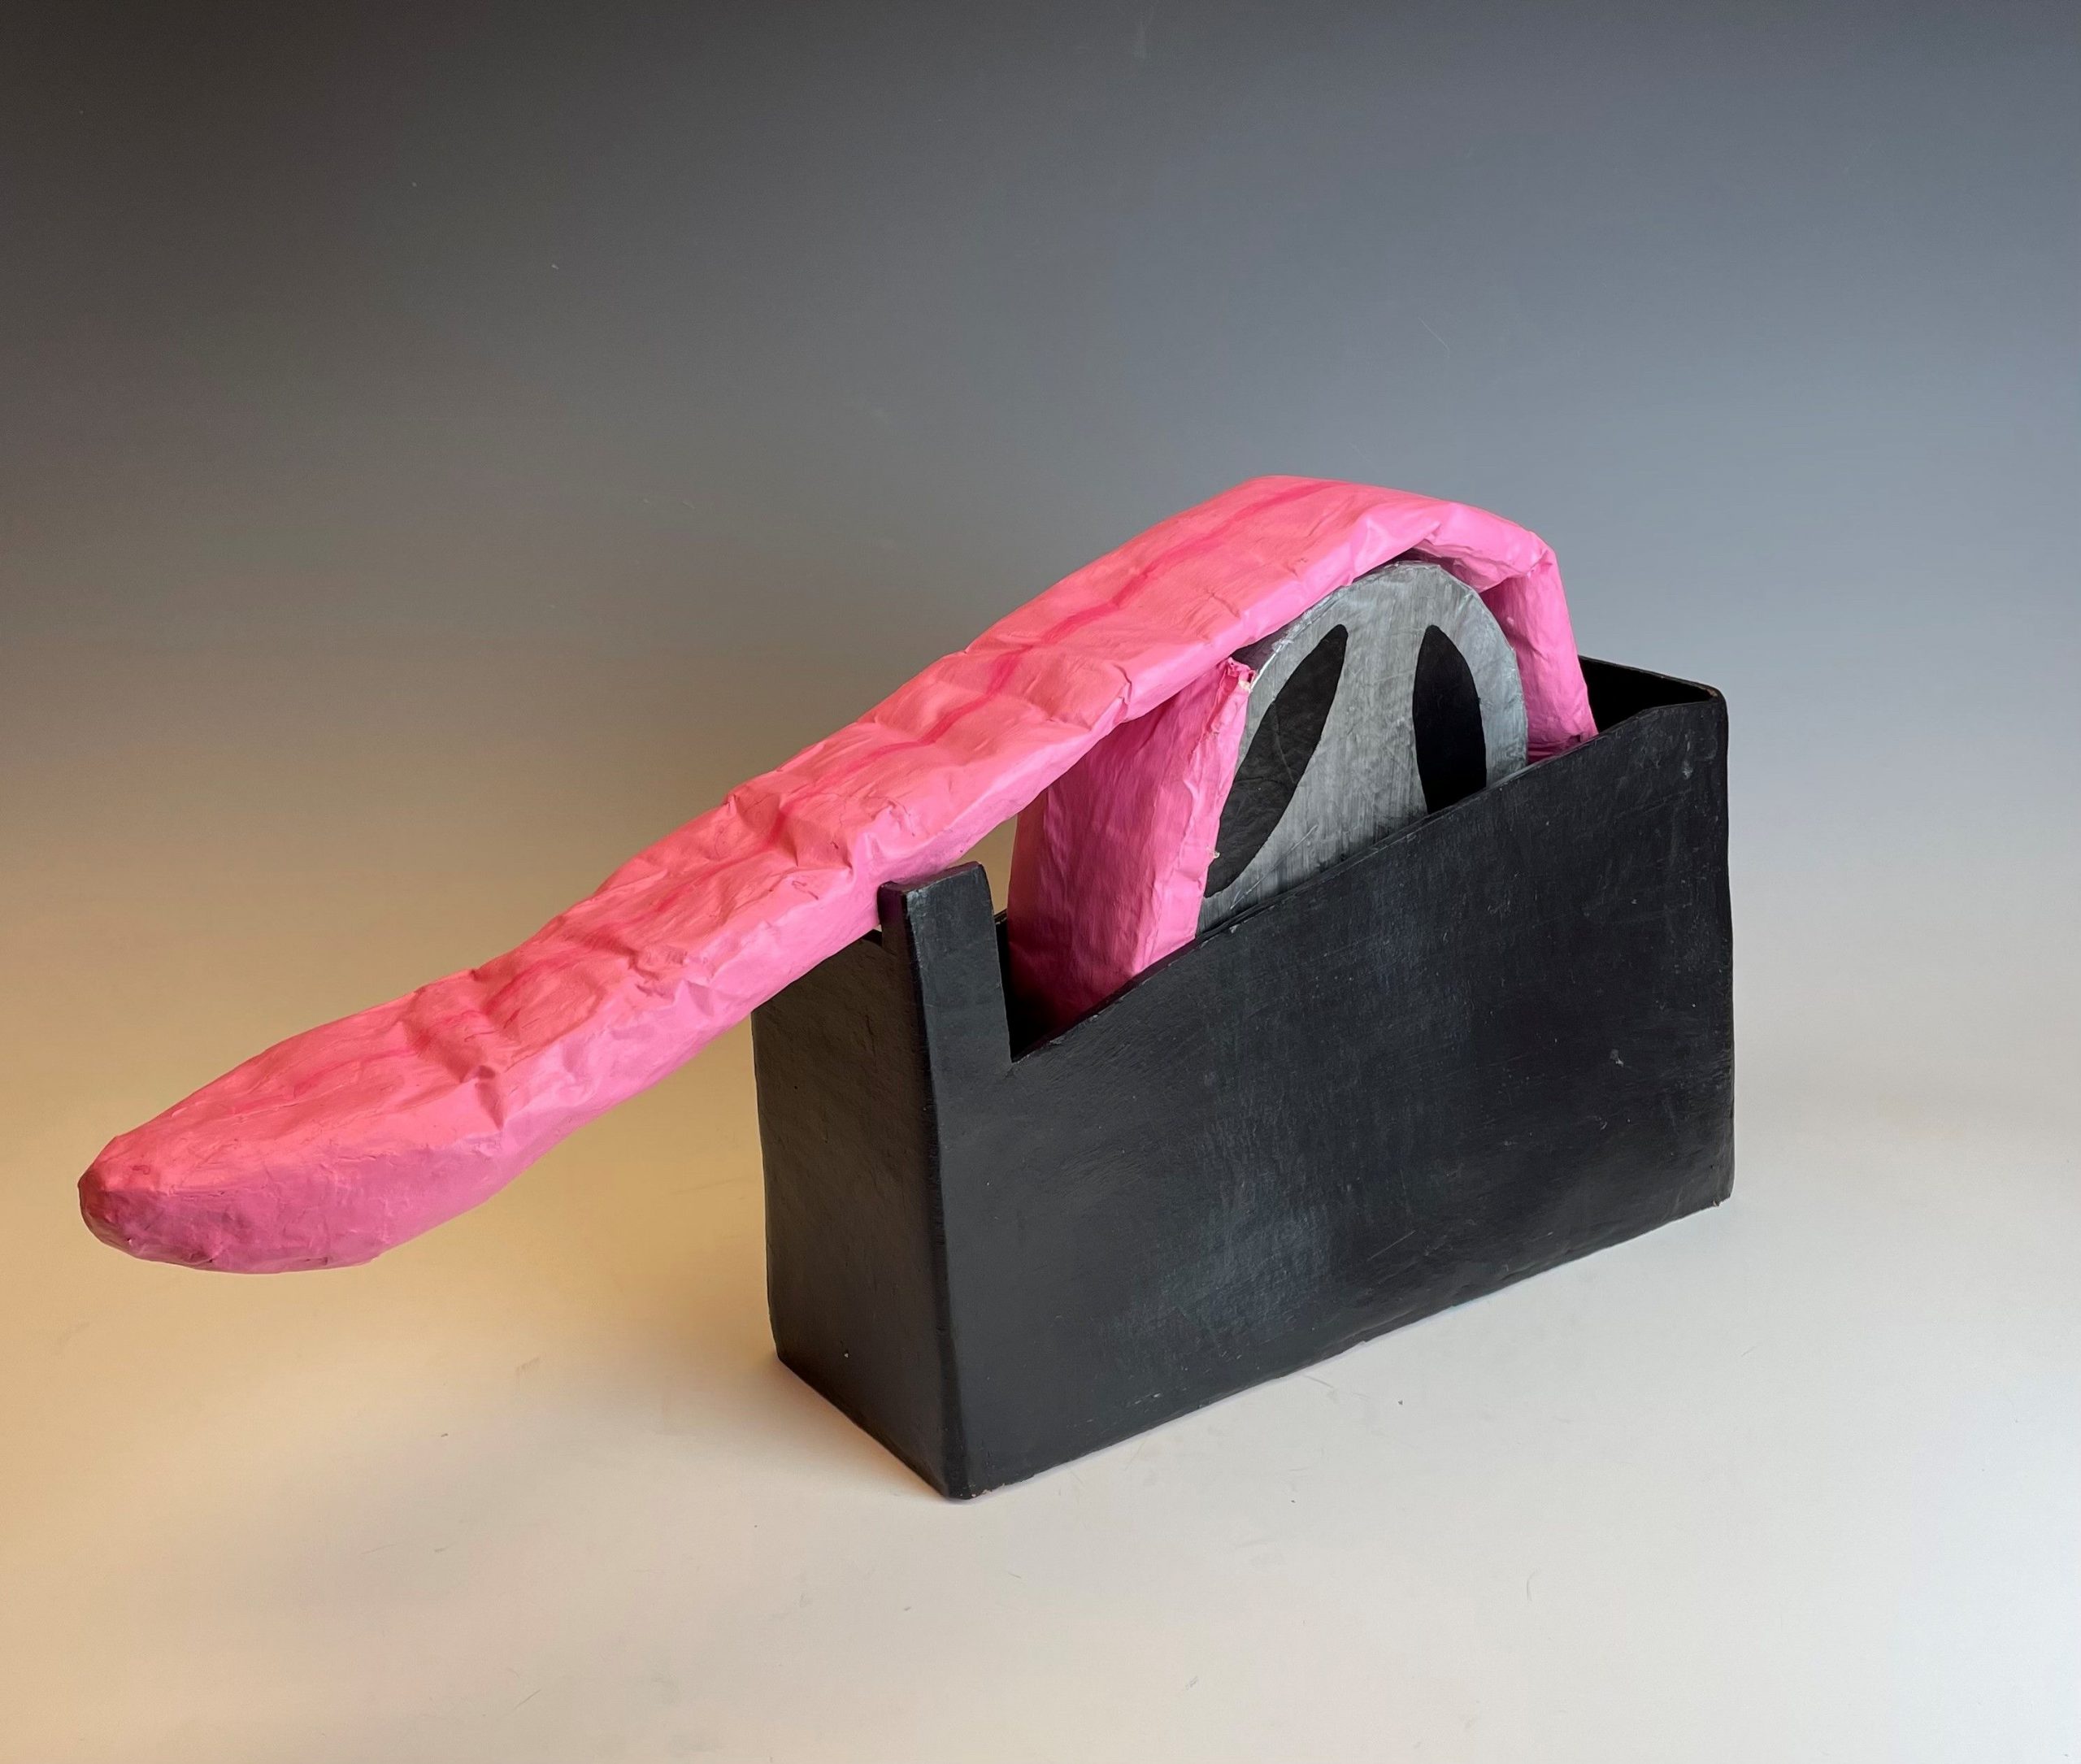 A large tape made of a human tongue